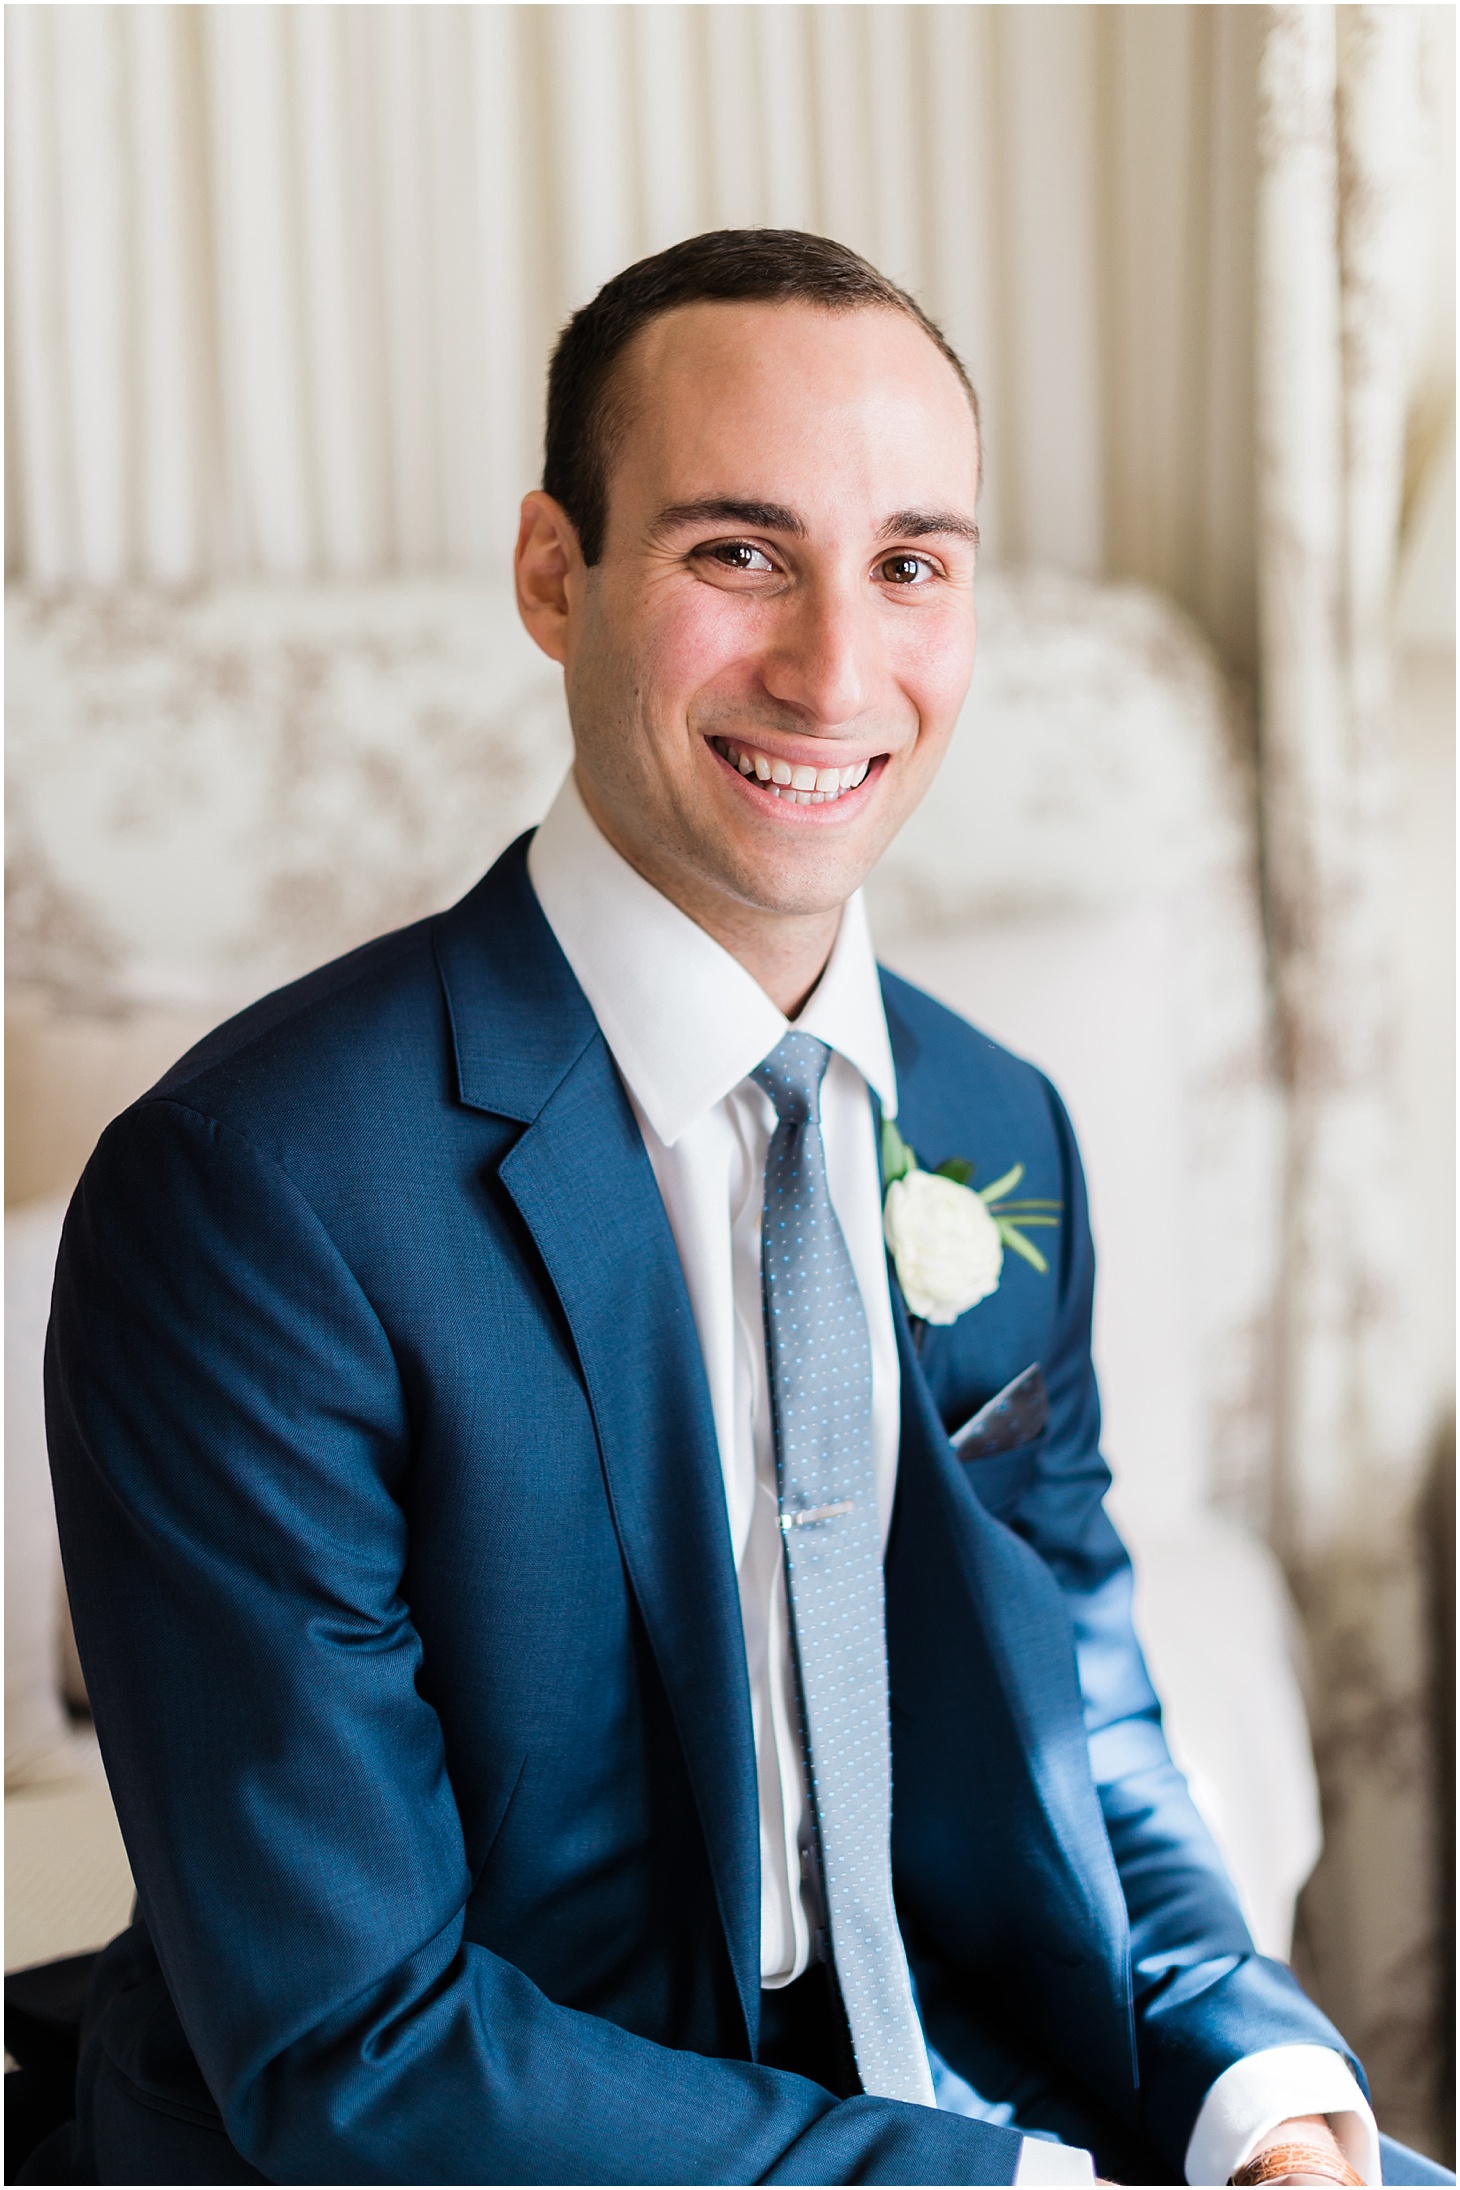 Groom's Portrait at The Hay-Adams Hotel, Industrial-Chic Wedding at Long View Gallery in DC, Sarah Bradshaw Photography, DC Wedding Photographer